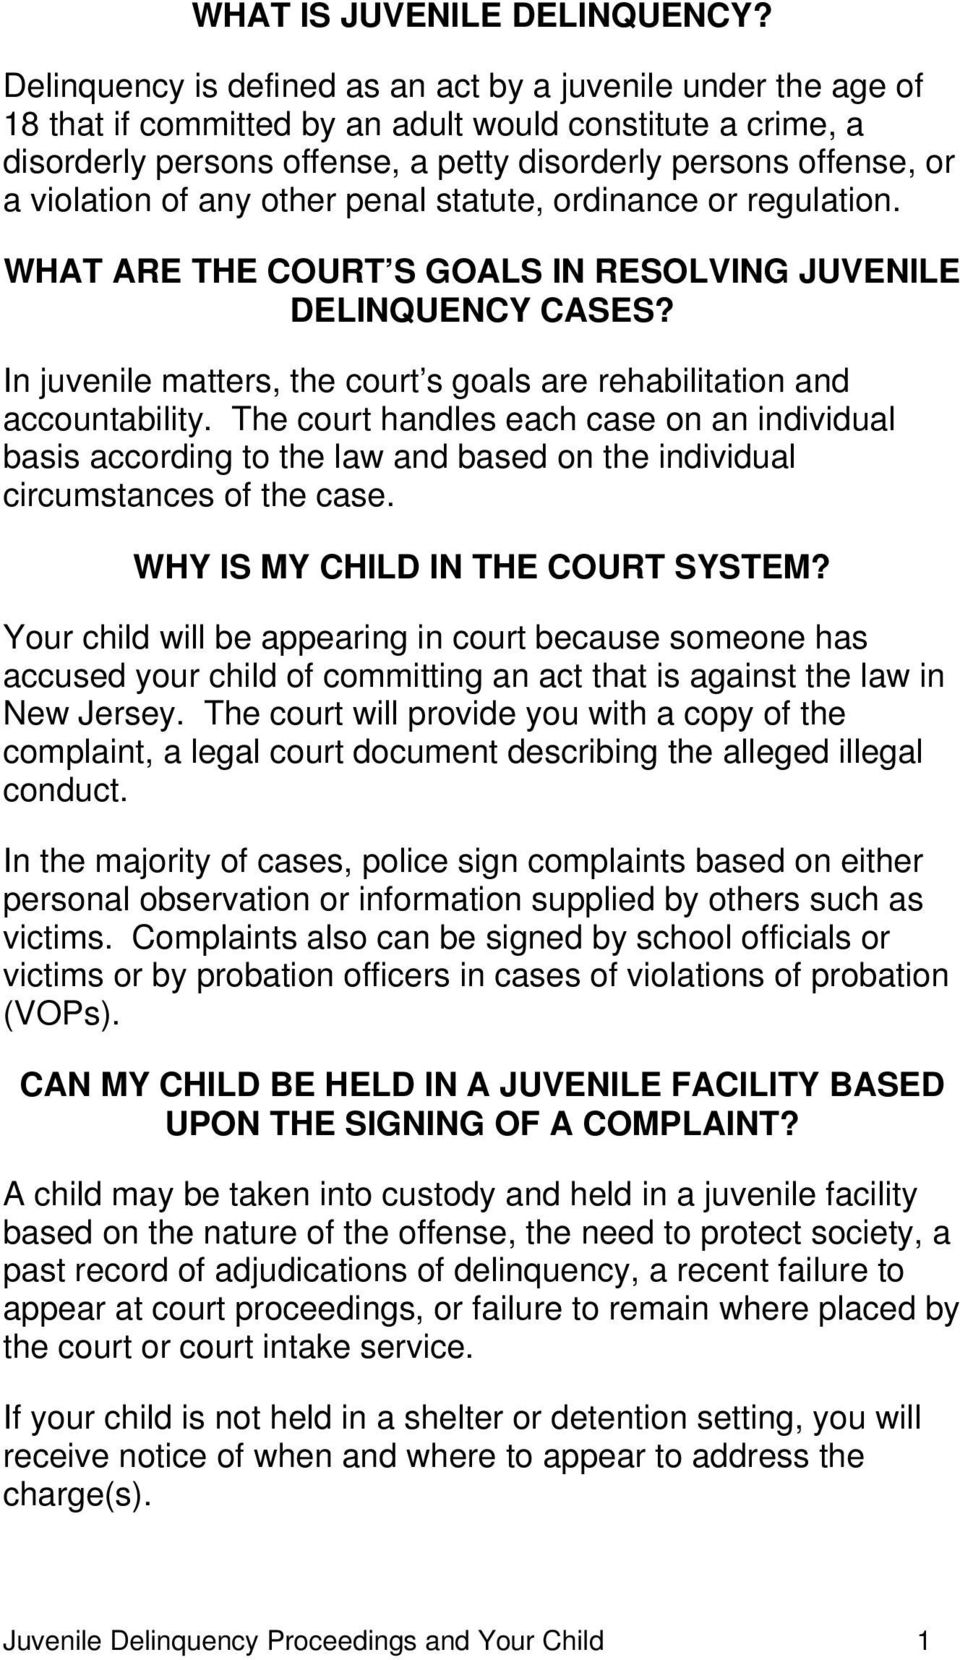 violation of any other penal statute, ordinance or regulation. WHAT ARE THE COURT S GOALS IN RESOLVING JUVENILE DELINQUENCY CASES?